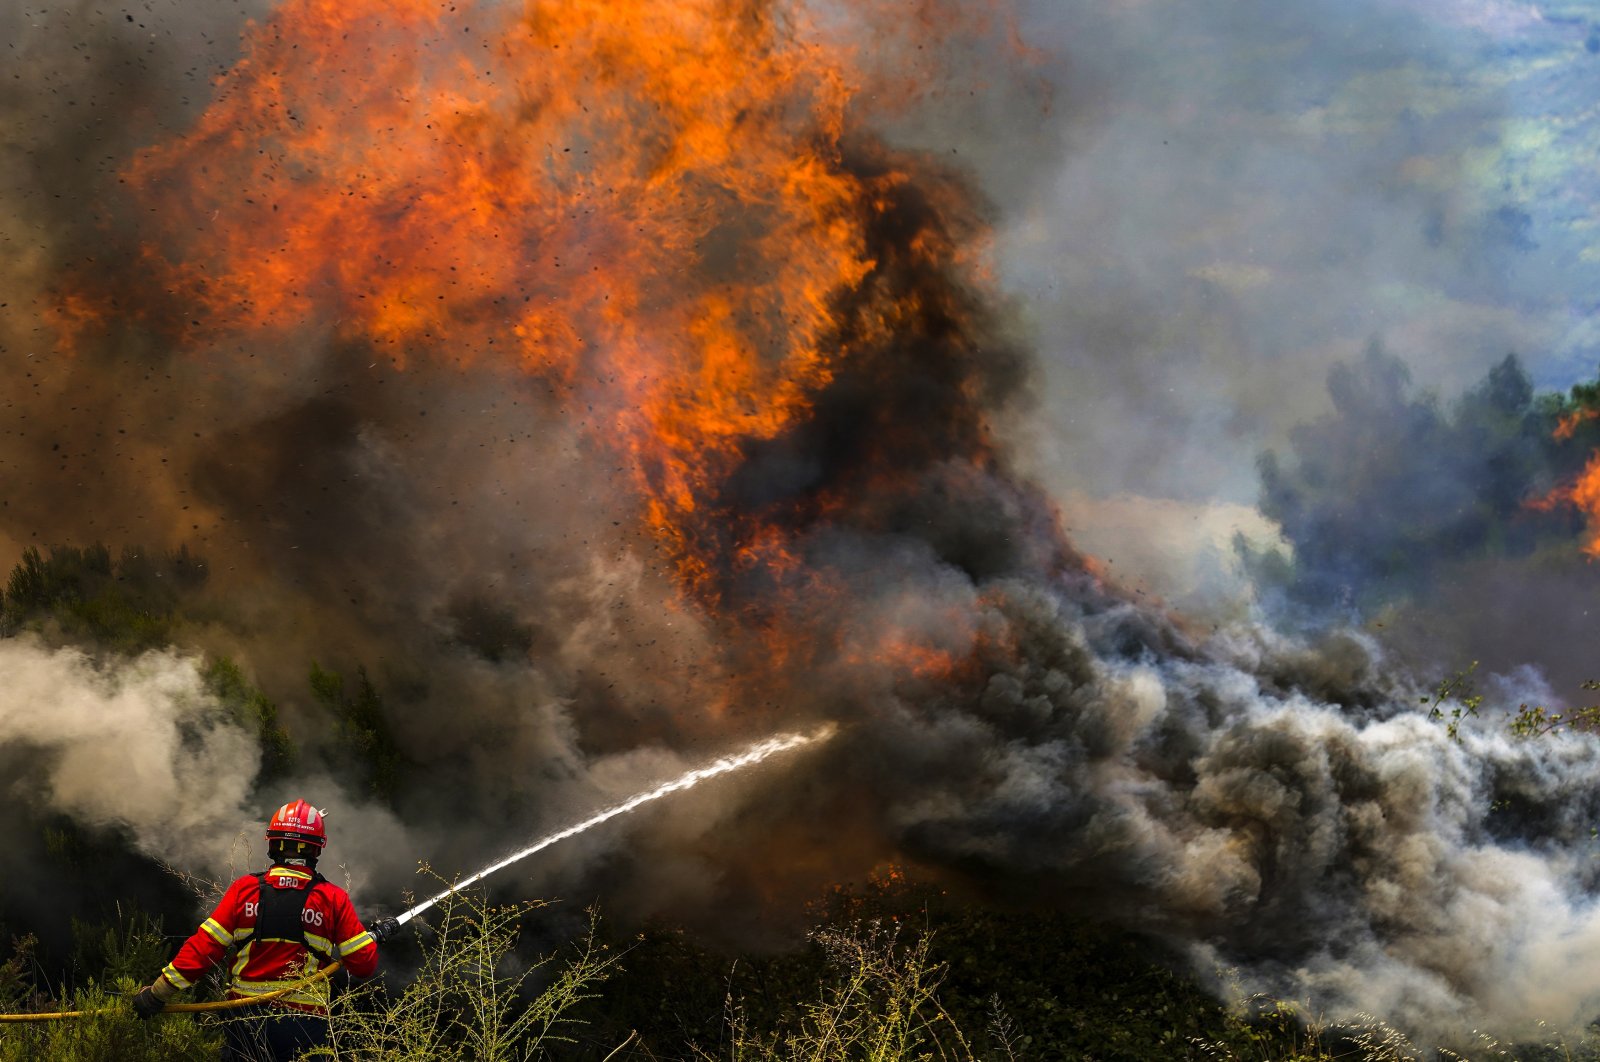 A firefighter fights the flames surrounding Ancede village during a wildfire in the municipality of Baiao, north of Portugal, July 15, 2022. (EPA-EFE Photo)